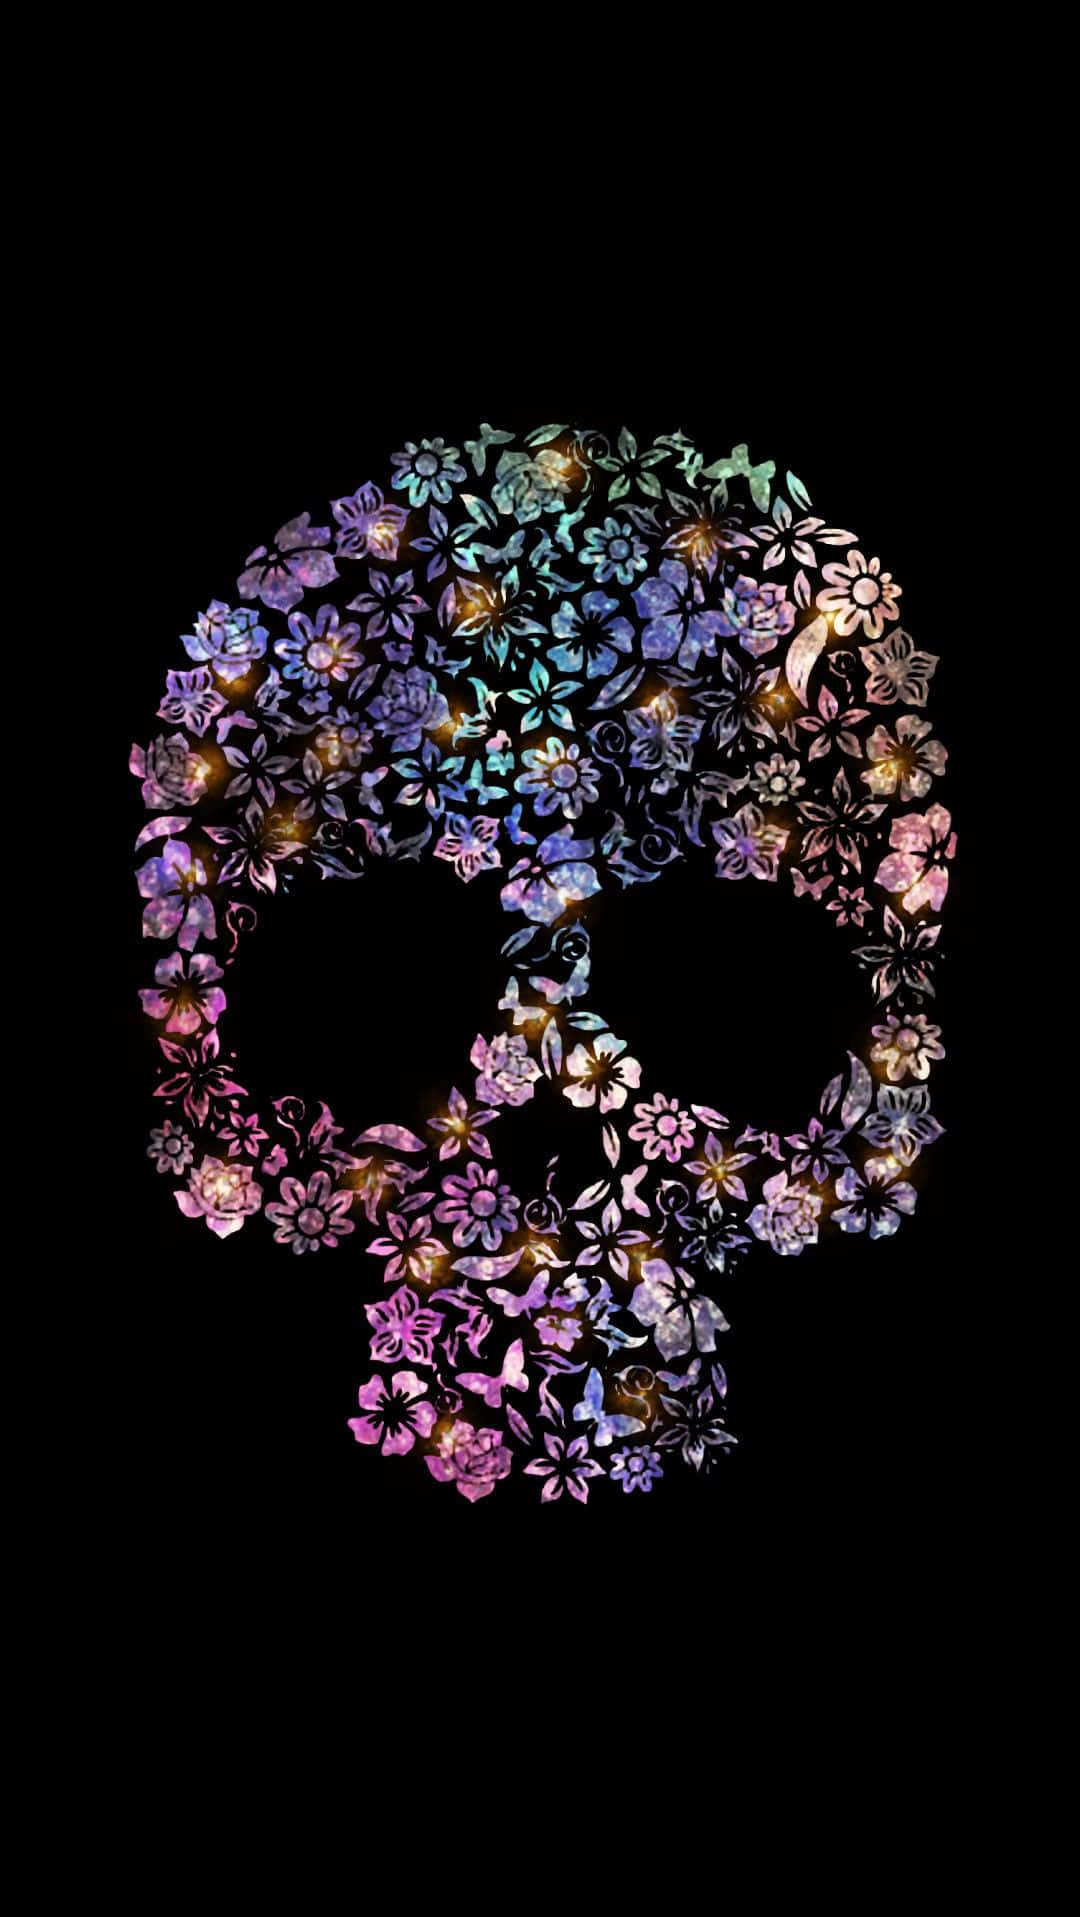 Download Celebrate life with a colorful Sugar Skull | Wallpapers.com